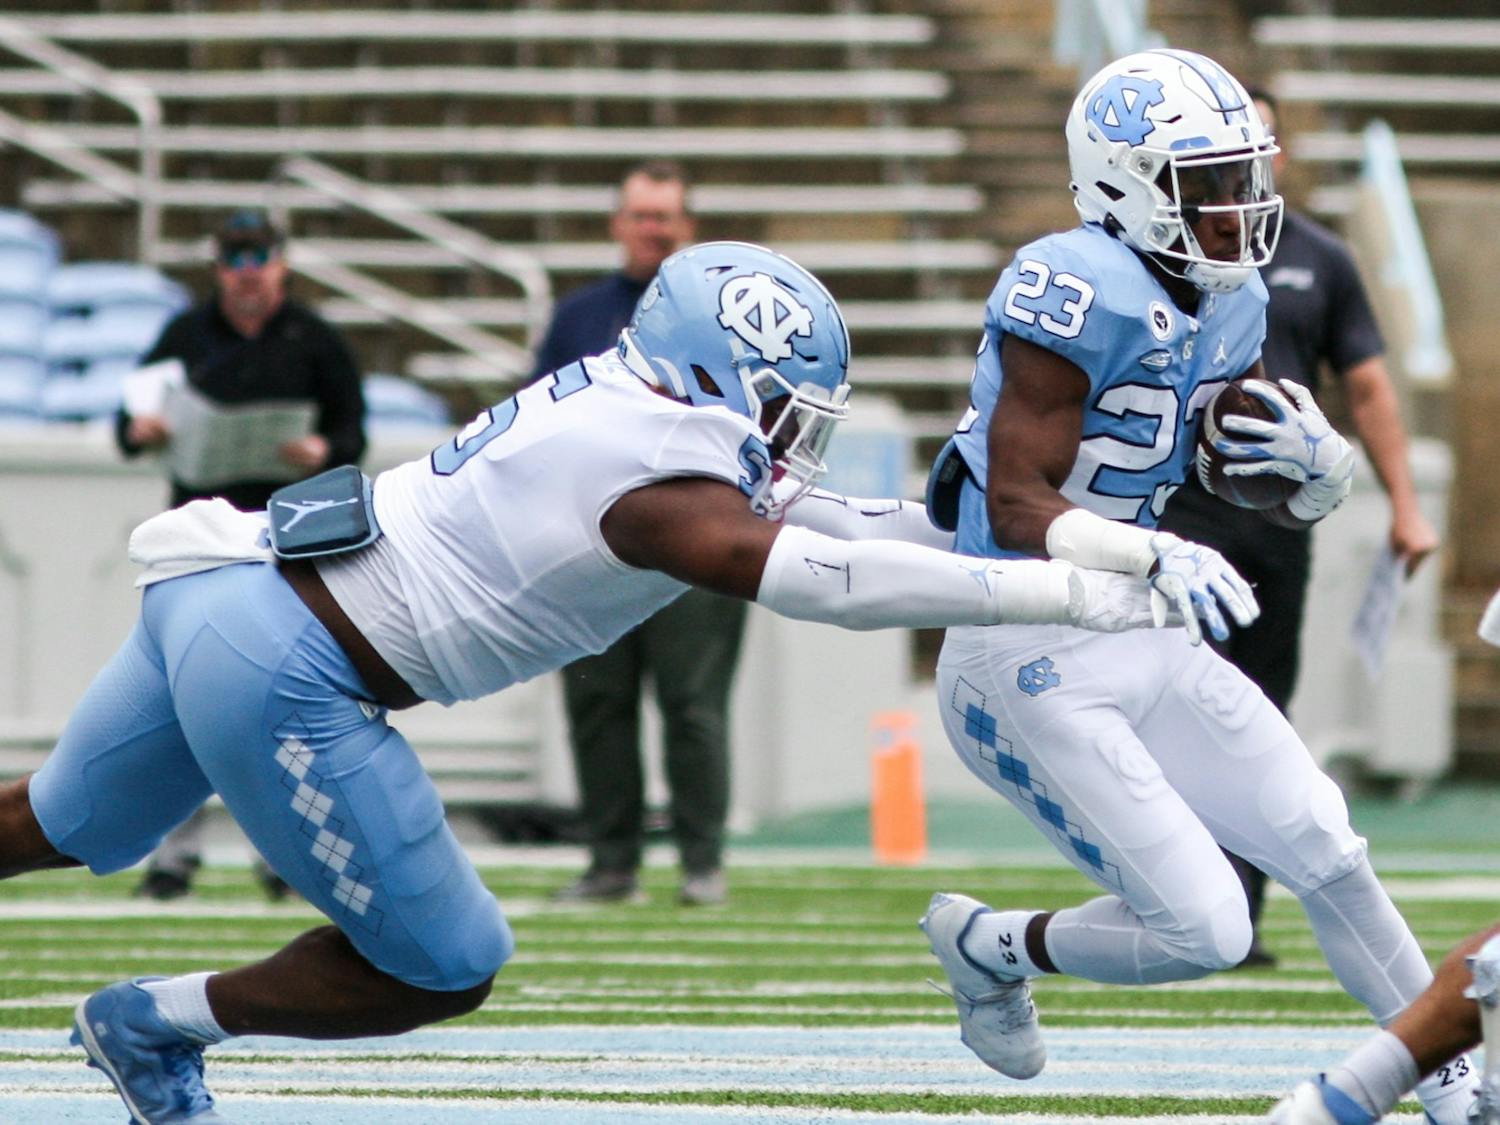 Freshman running back George Pettaway (23) breaks through the defensive line in the Spring Game on Saturday, April 9, 2022. The Tar Heels and Carolina tied, 14-14.